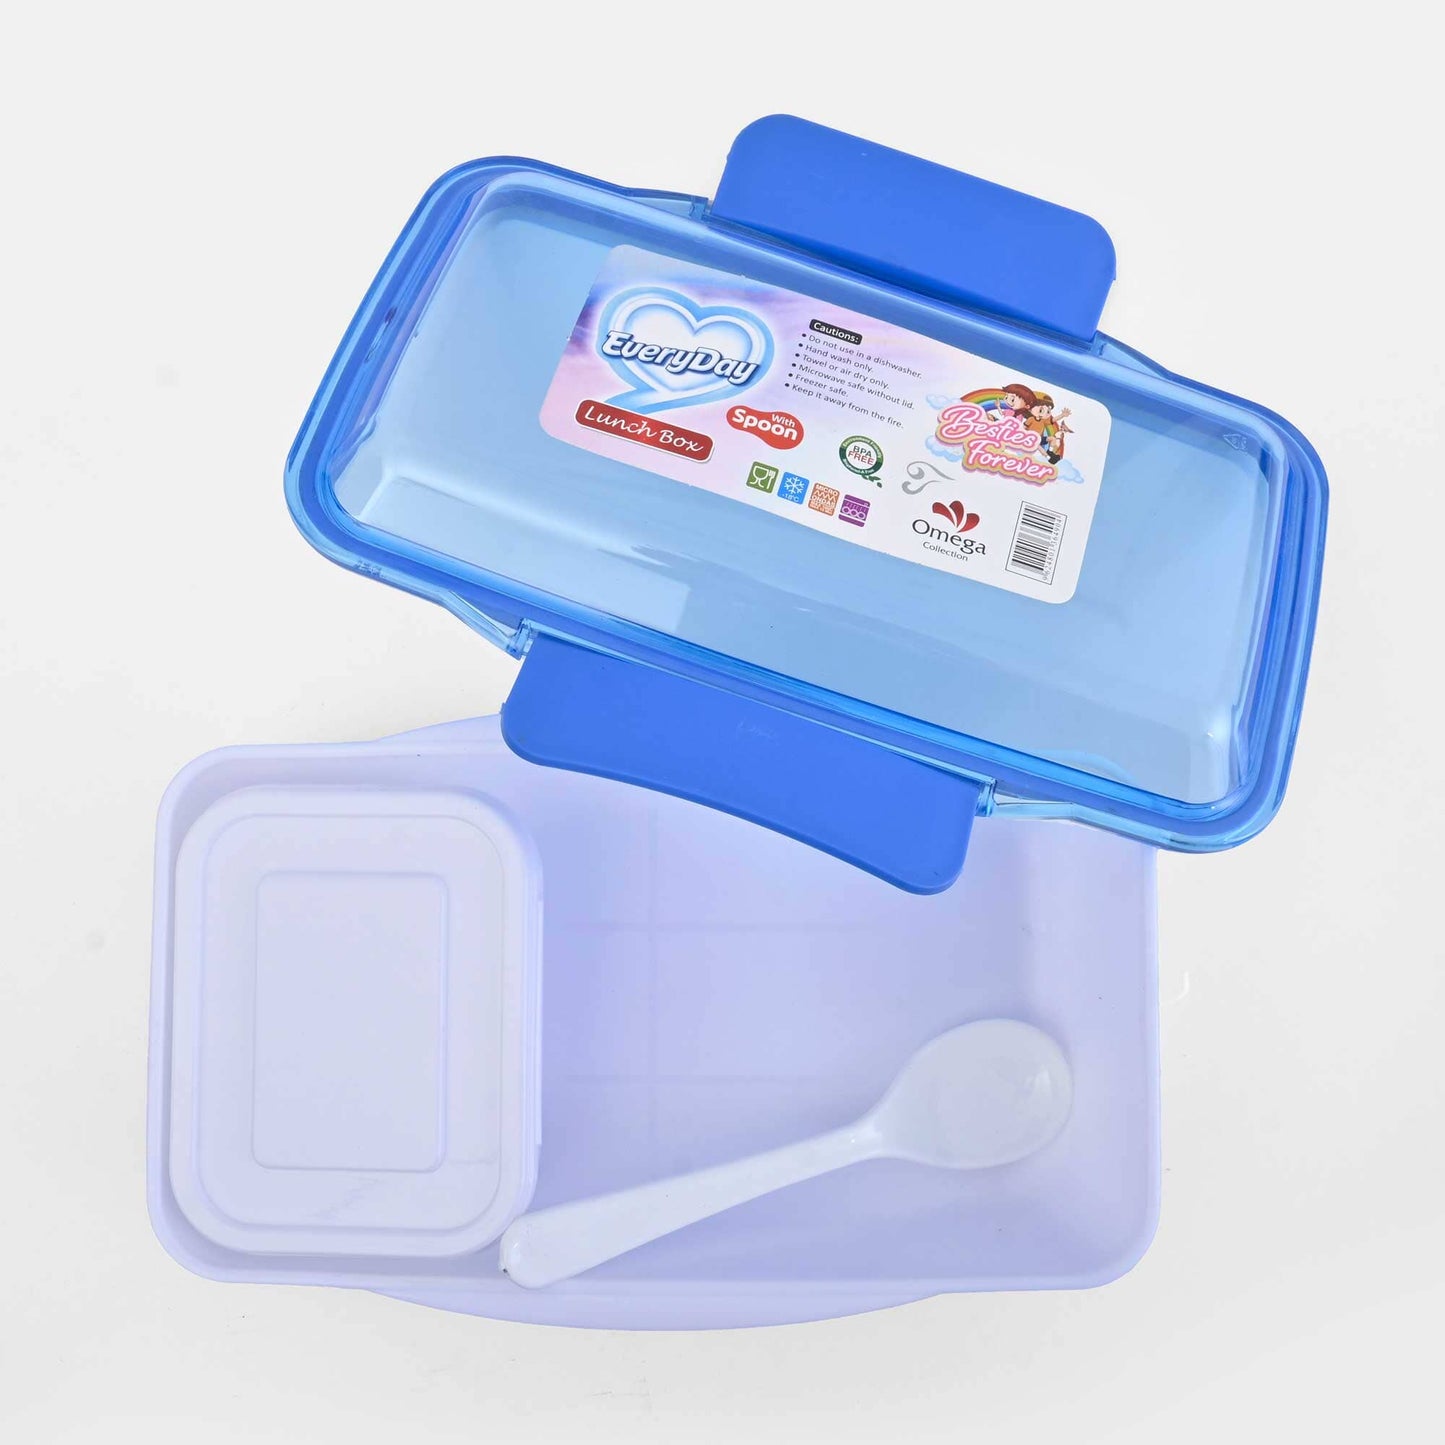 Everyday Kid's Besties Forever Lunch Box With Removable Sticker Crockery RAM Sky Blue 